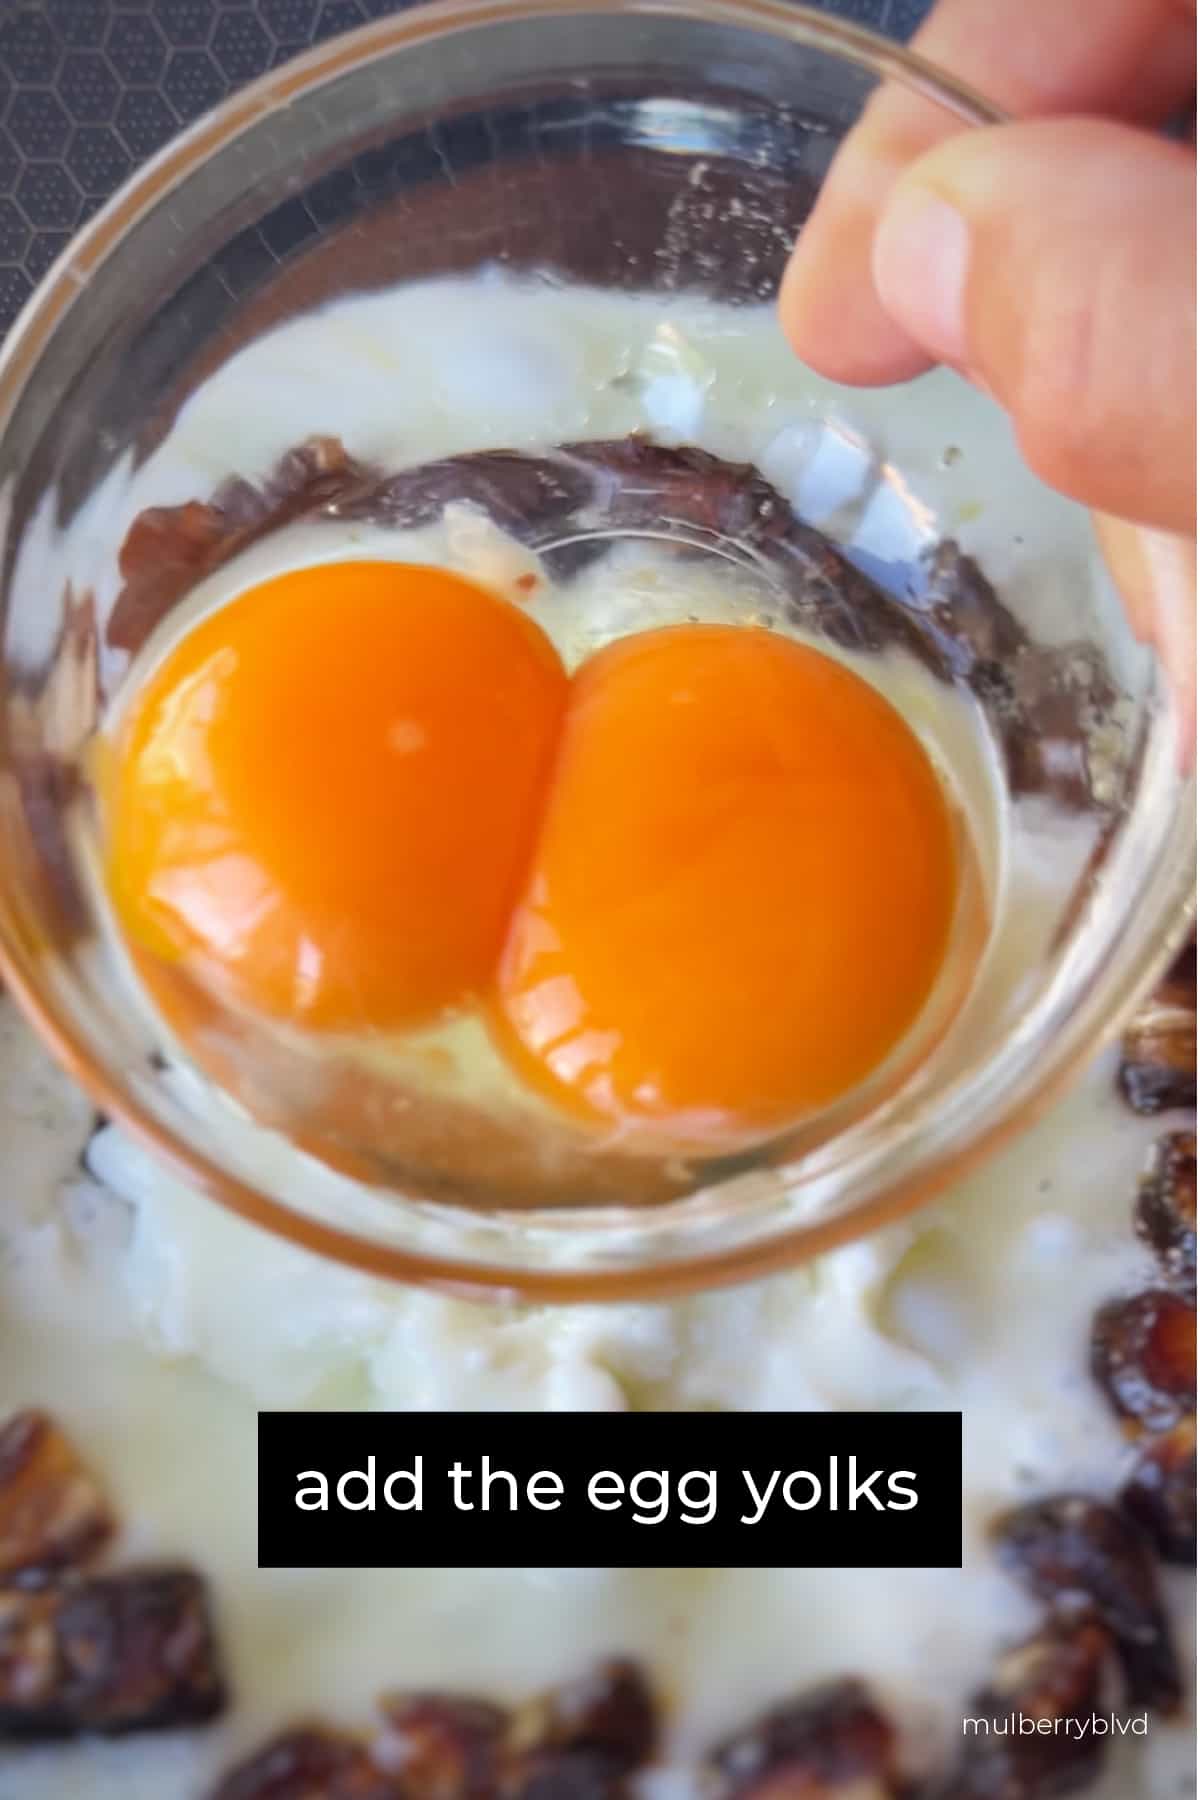 This image shows a hand holding a a small bowl with two egg yolks, with the image saying "add the egg yolks".